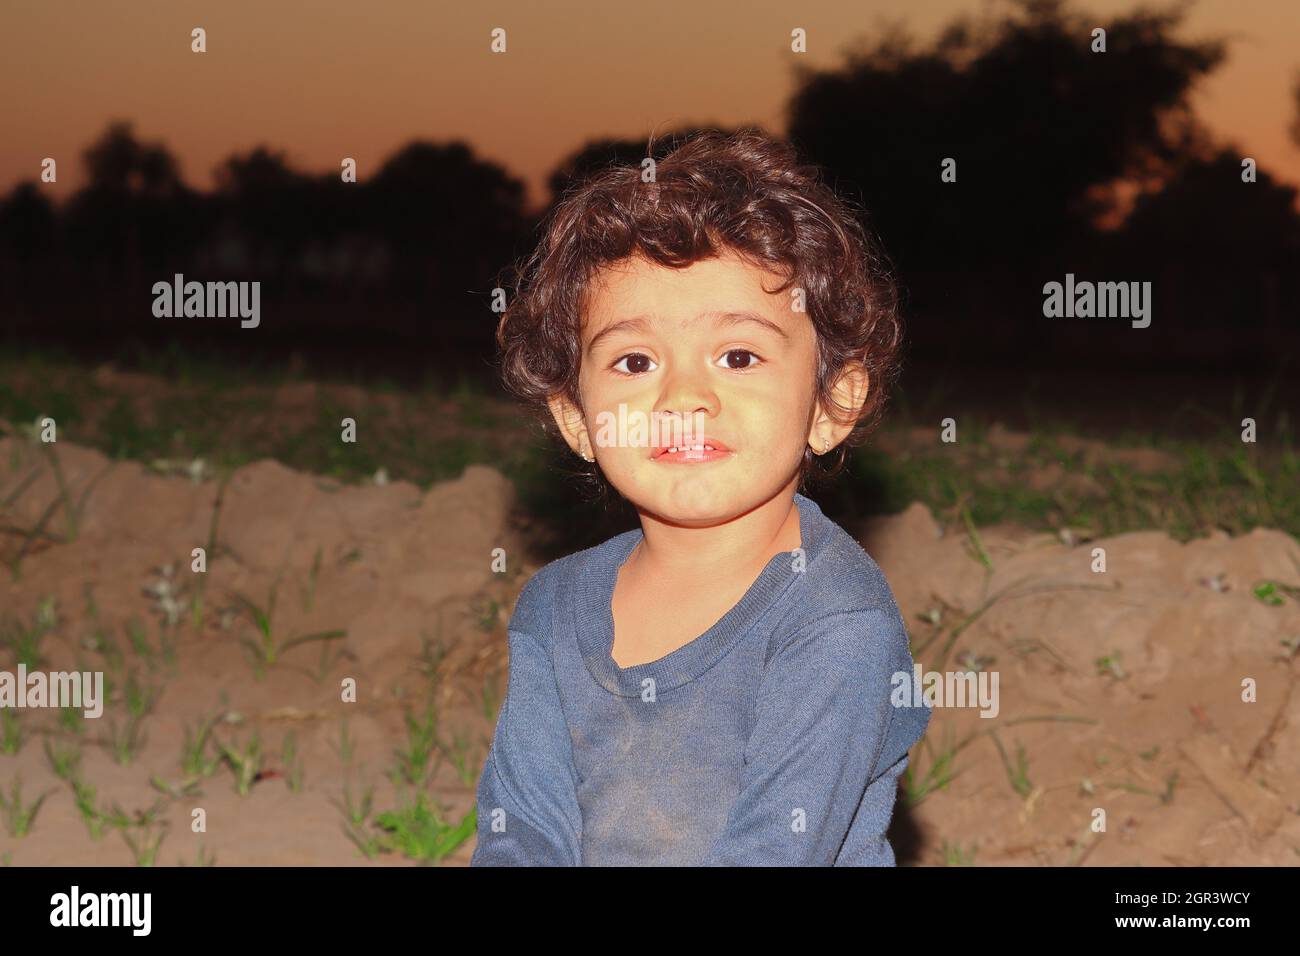 Indian Little Child Royalty Free Photo With Blur Background Of Sunset In India Stock Photo